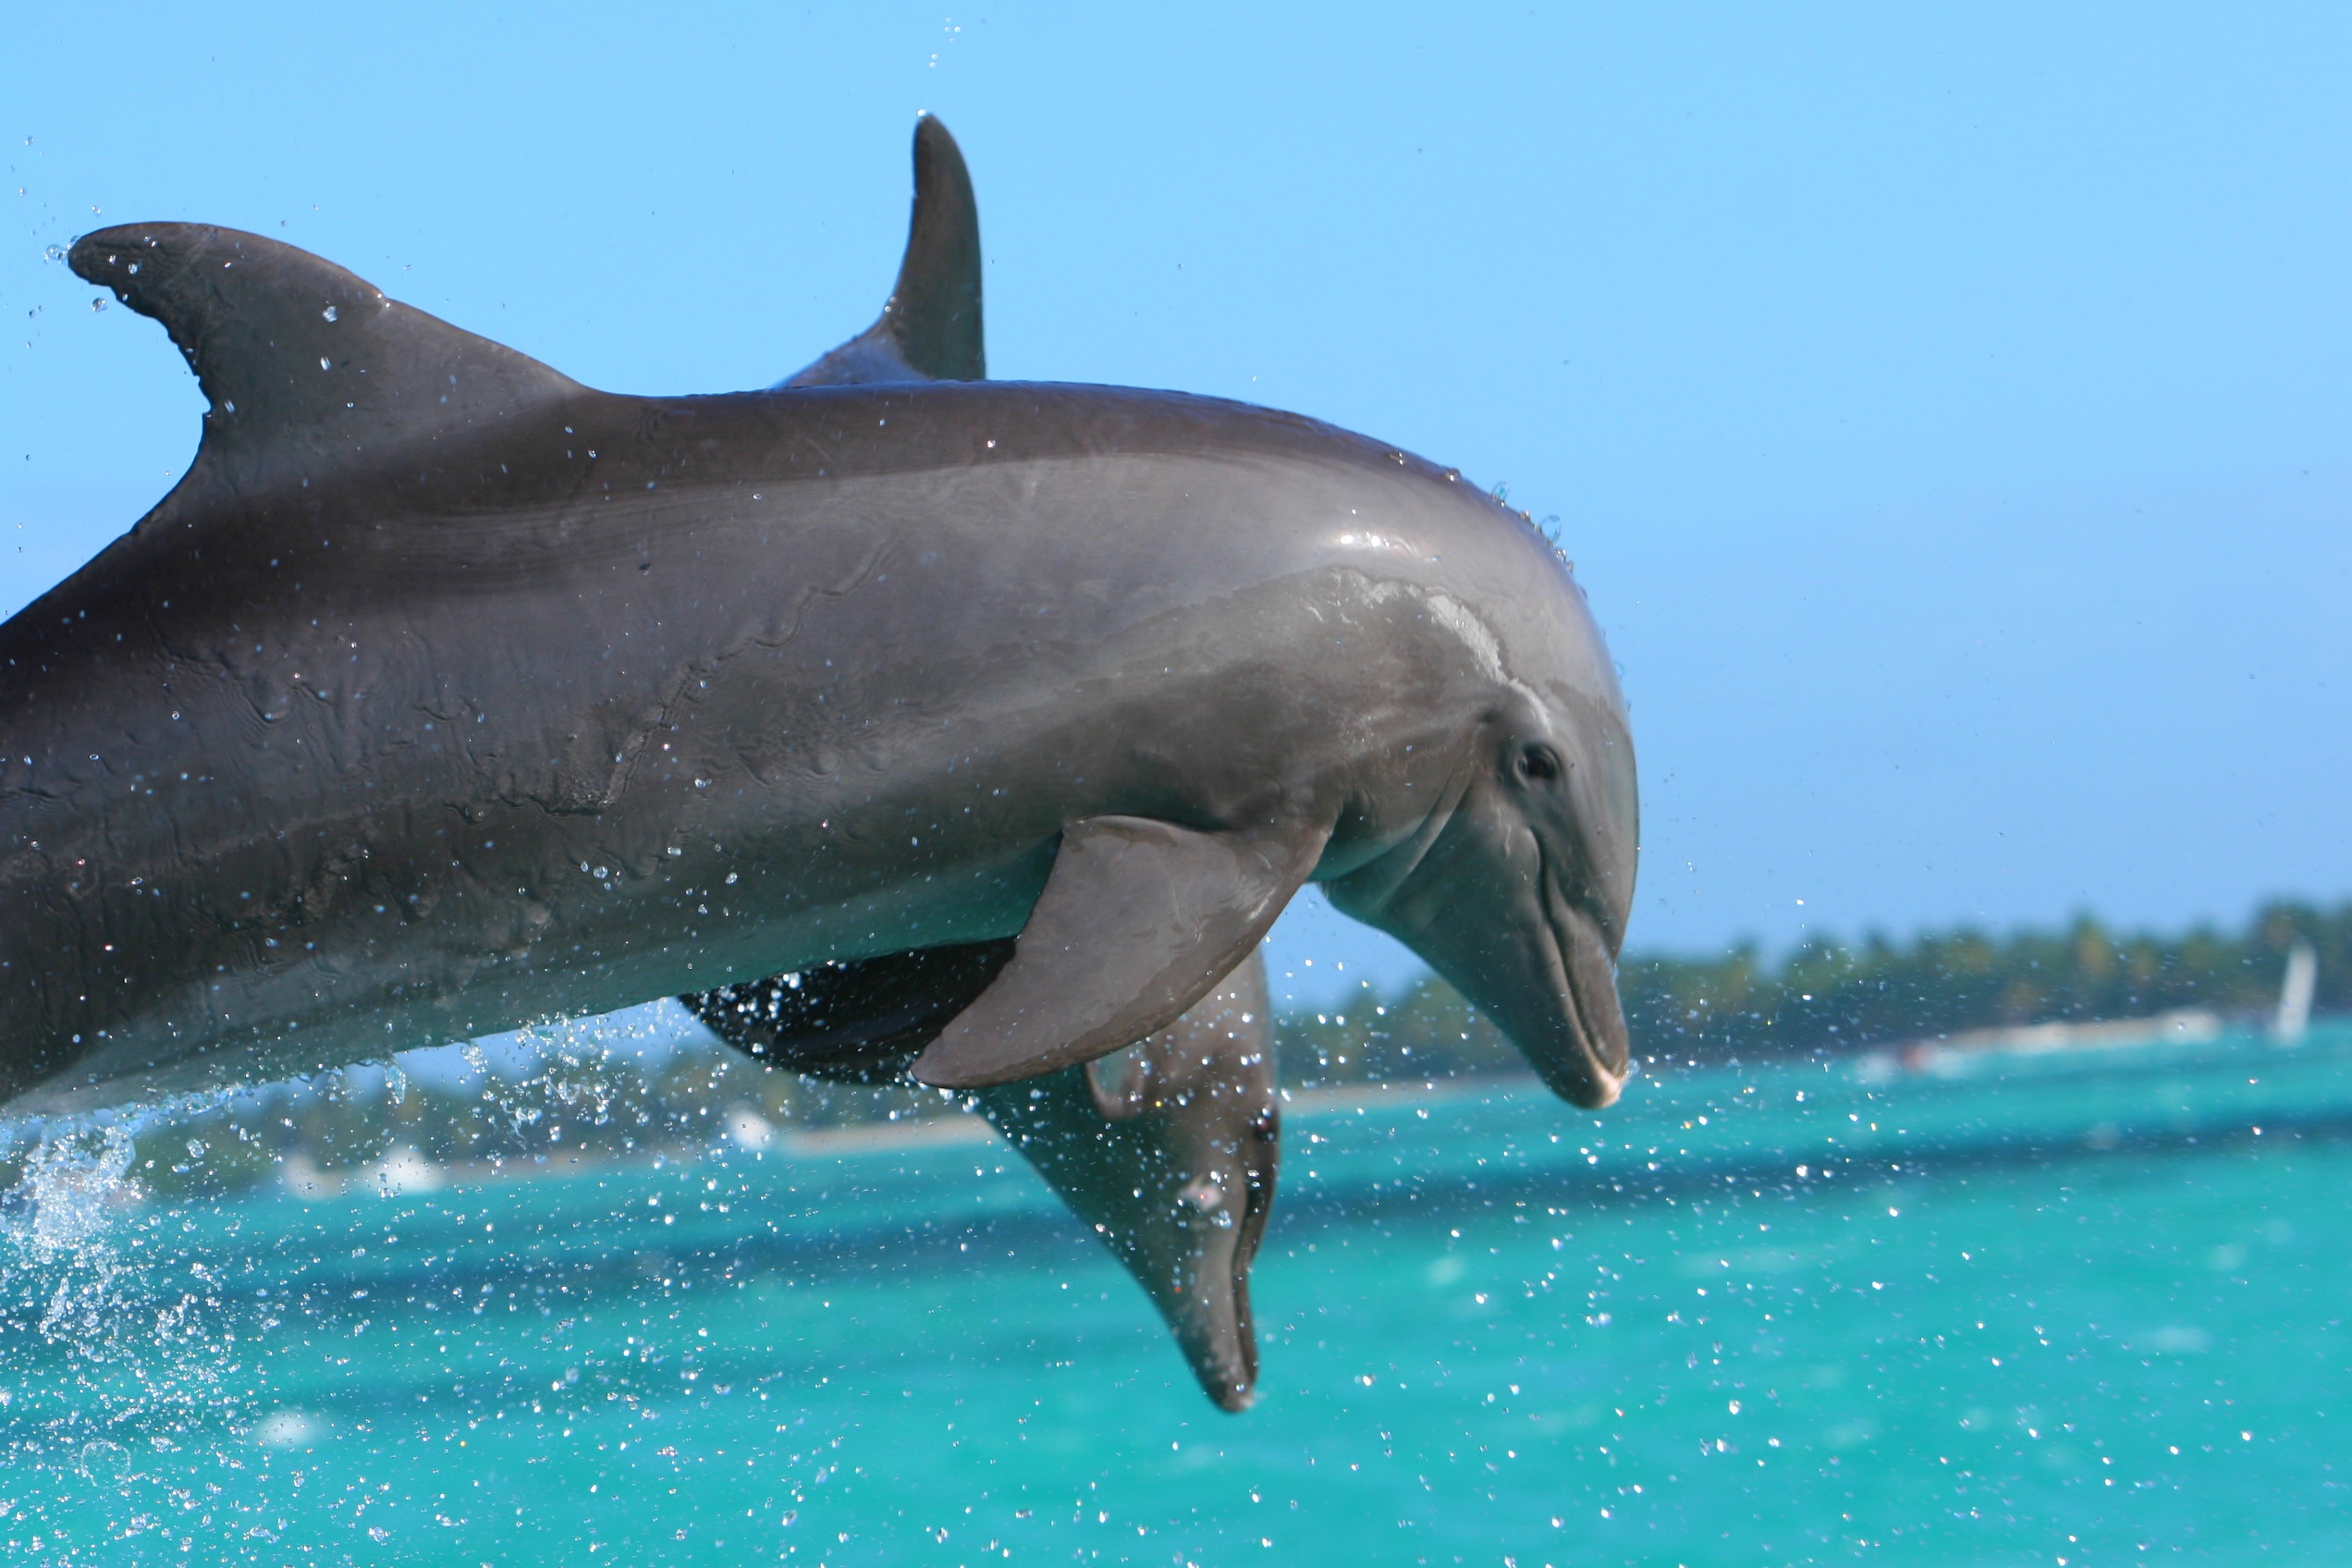 Dolphins jumping out of the water.